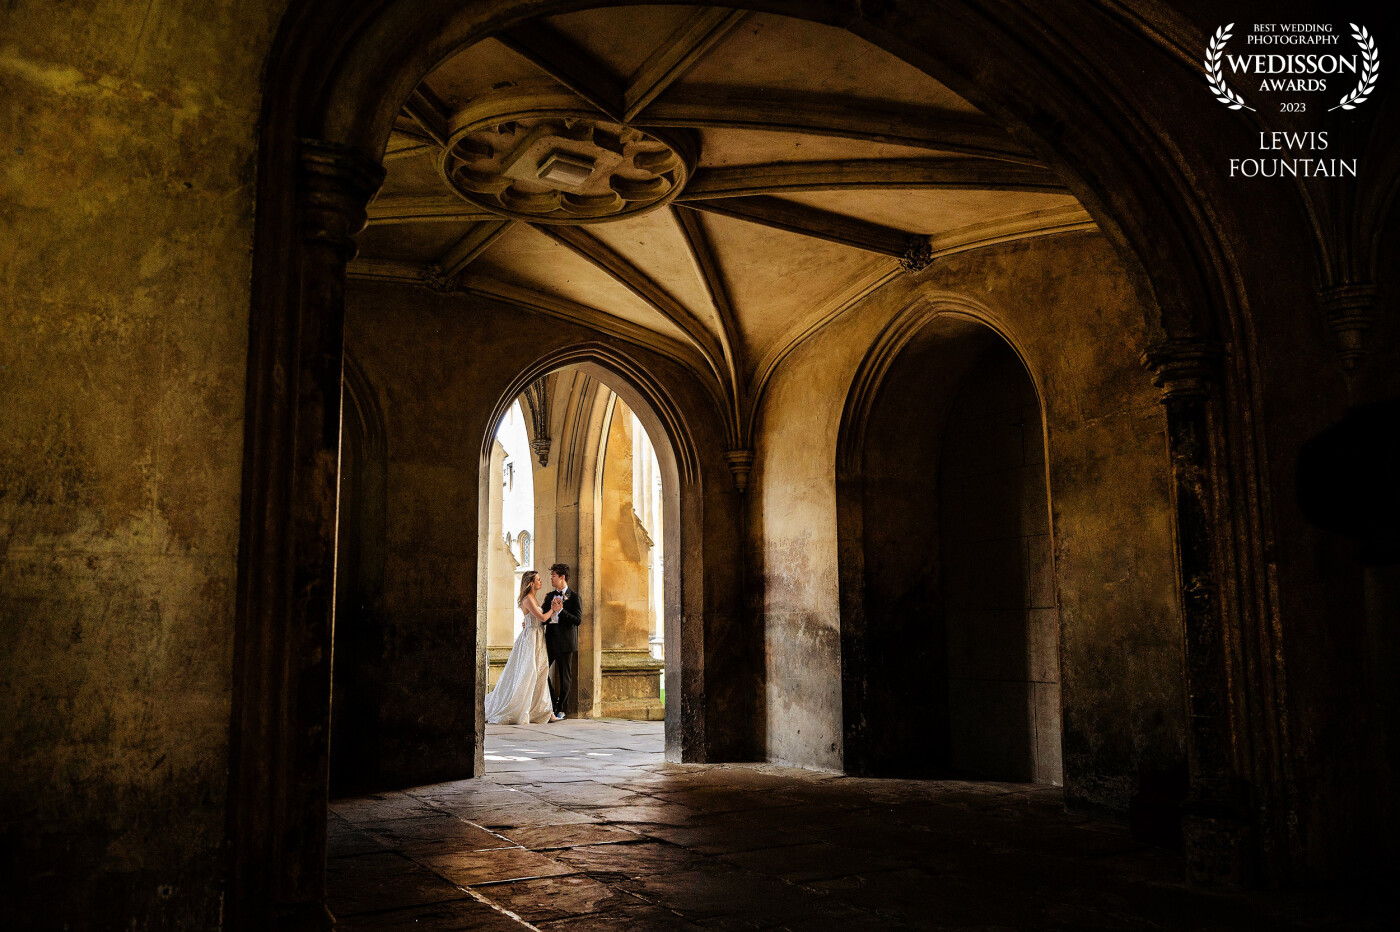 Barbara & Rupert’s wedding at St John’s College Cambridge was a day  they’ll never forget. <br />
<br />
This shot deep within the college architecture just jumped out at us with the beautiful contrasting light; and they loved it ❤️